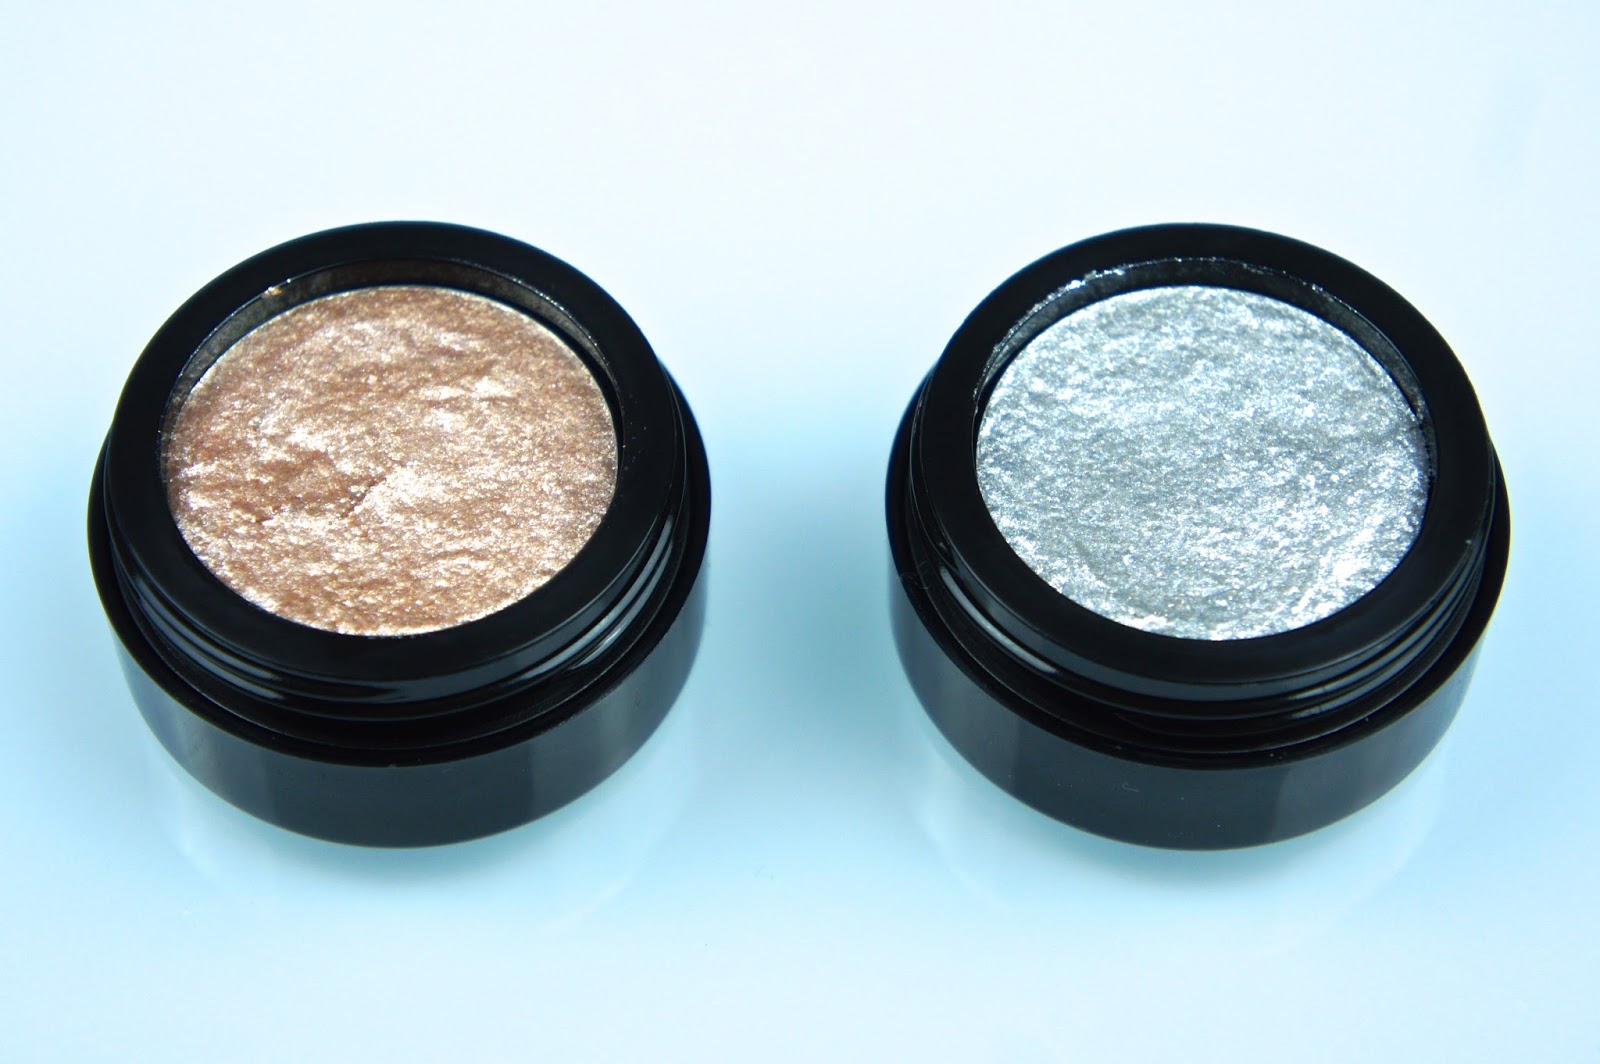 Rose,gold,silver,makeup revolution,MUR,awesome,metals,eyeshadow